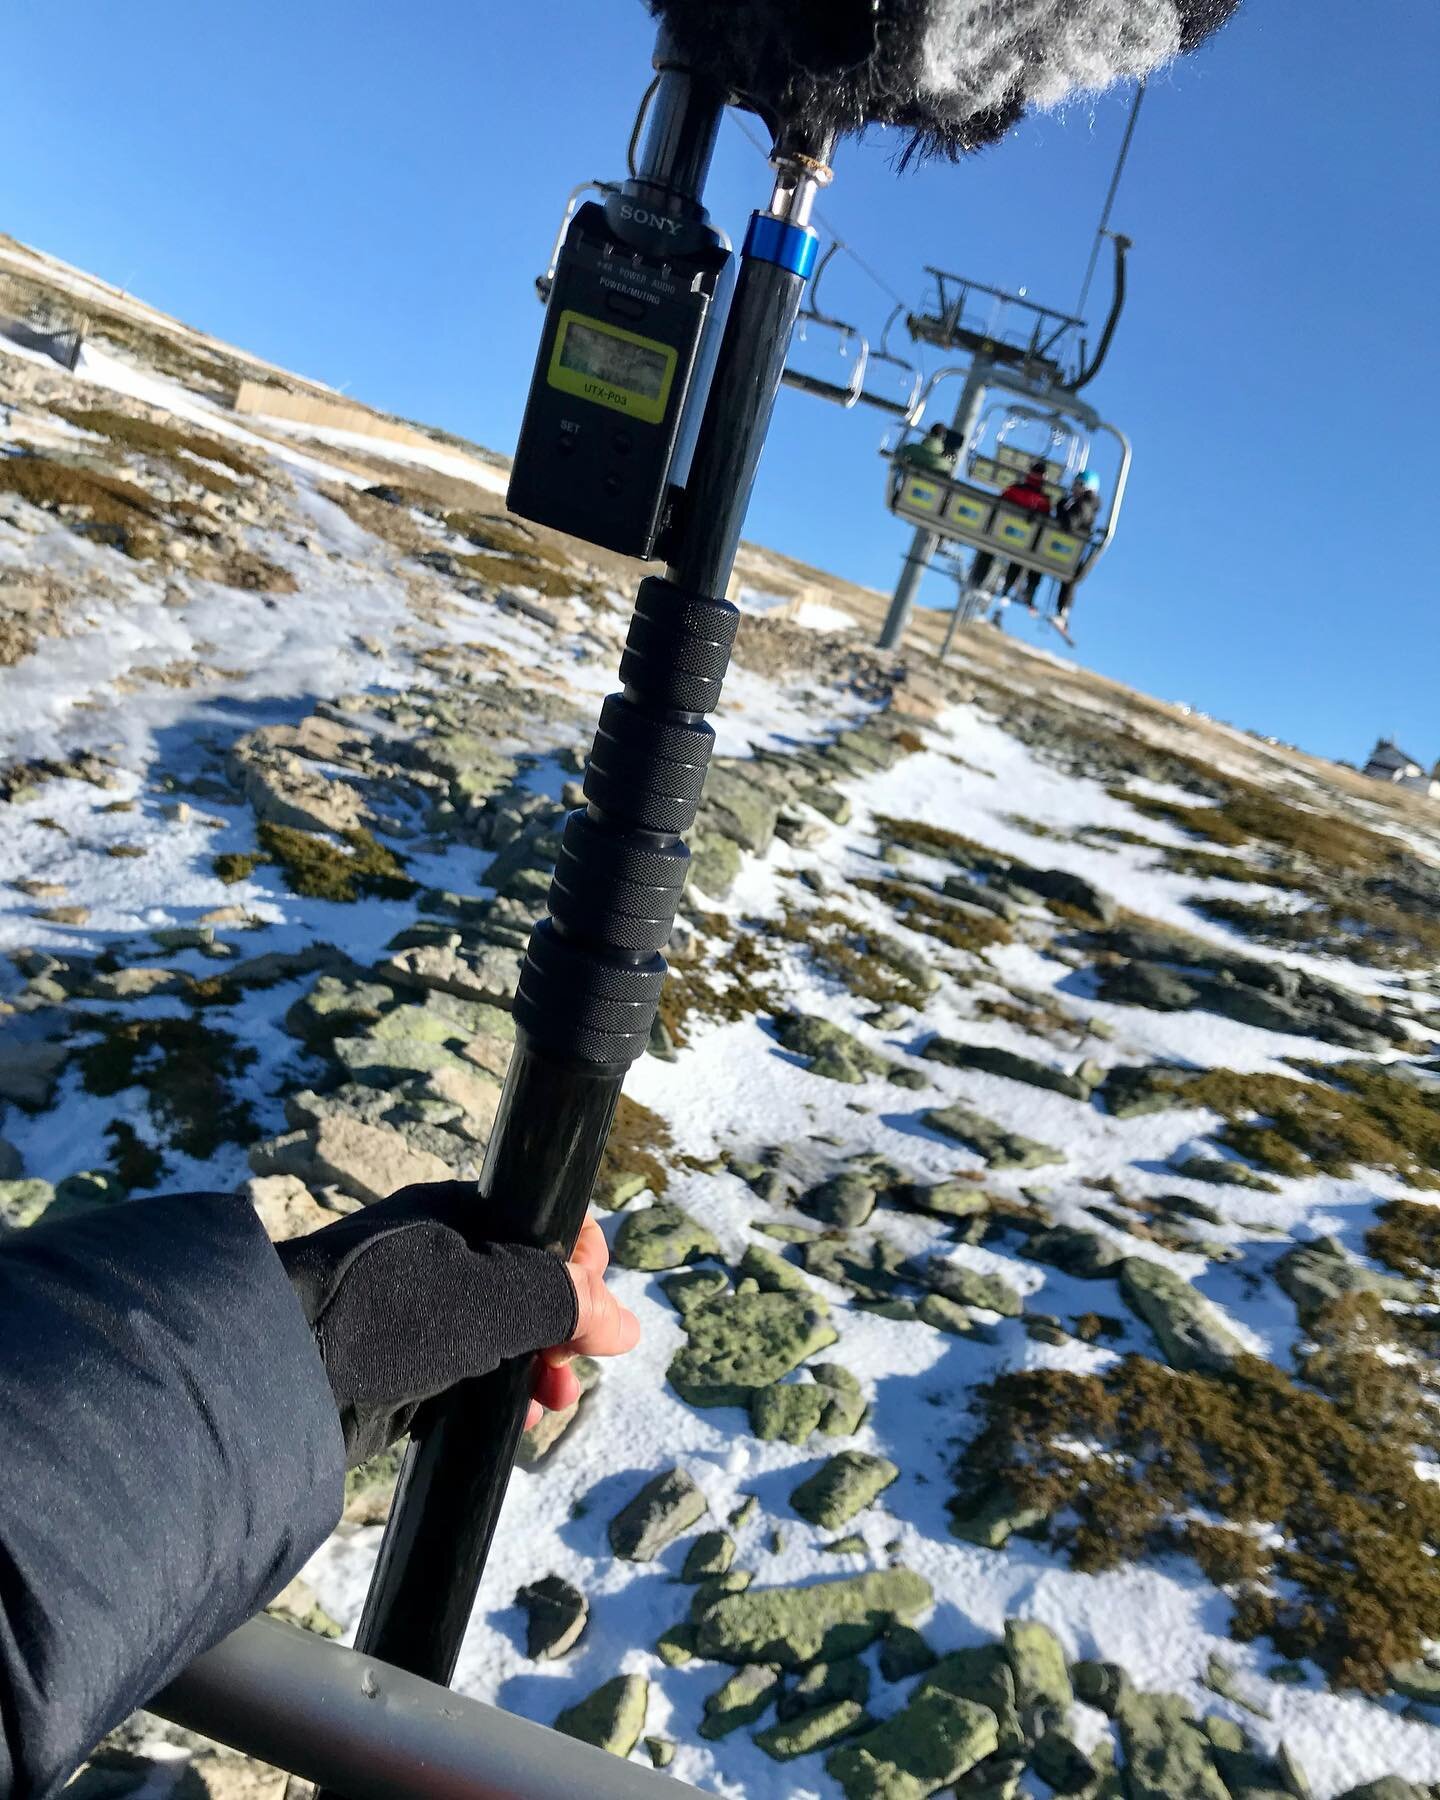 Sound up high! Recording the two contributors riding the ski lift in the front.
.
.
.
.
.
#onlocation #locationsound #soundmixers #soundrecordist #soundforfilm #soundforpicture #lifeonset #sounddepartment #productionsound #film #filmmaking #filmcrew 